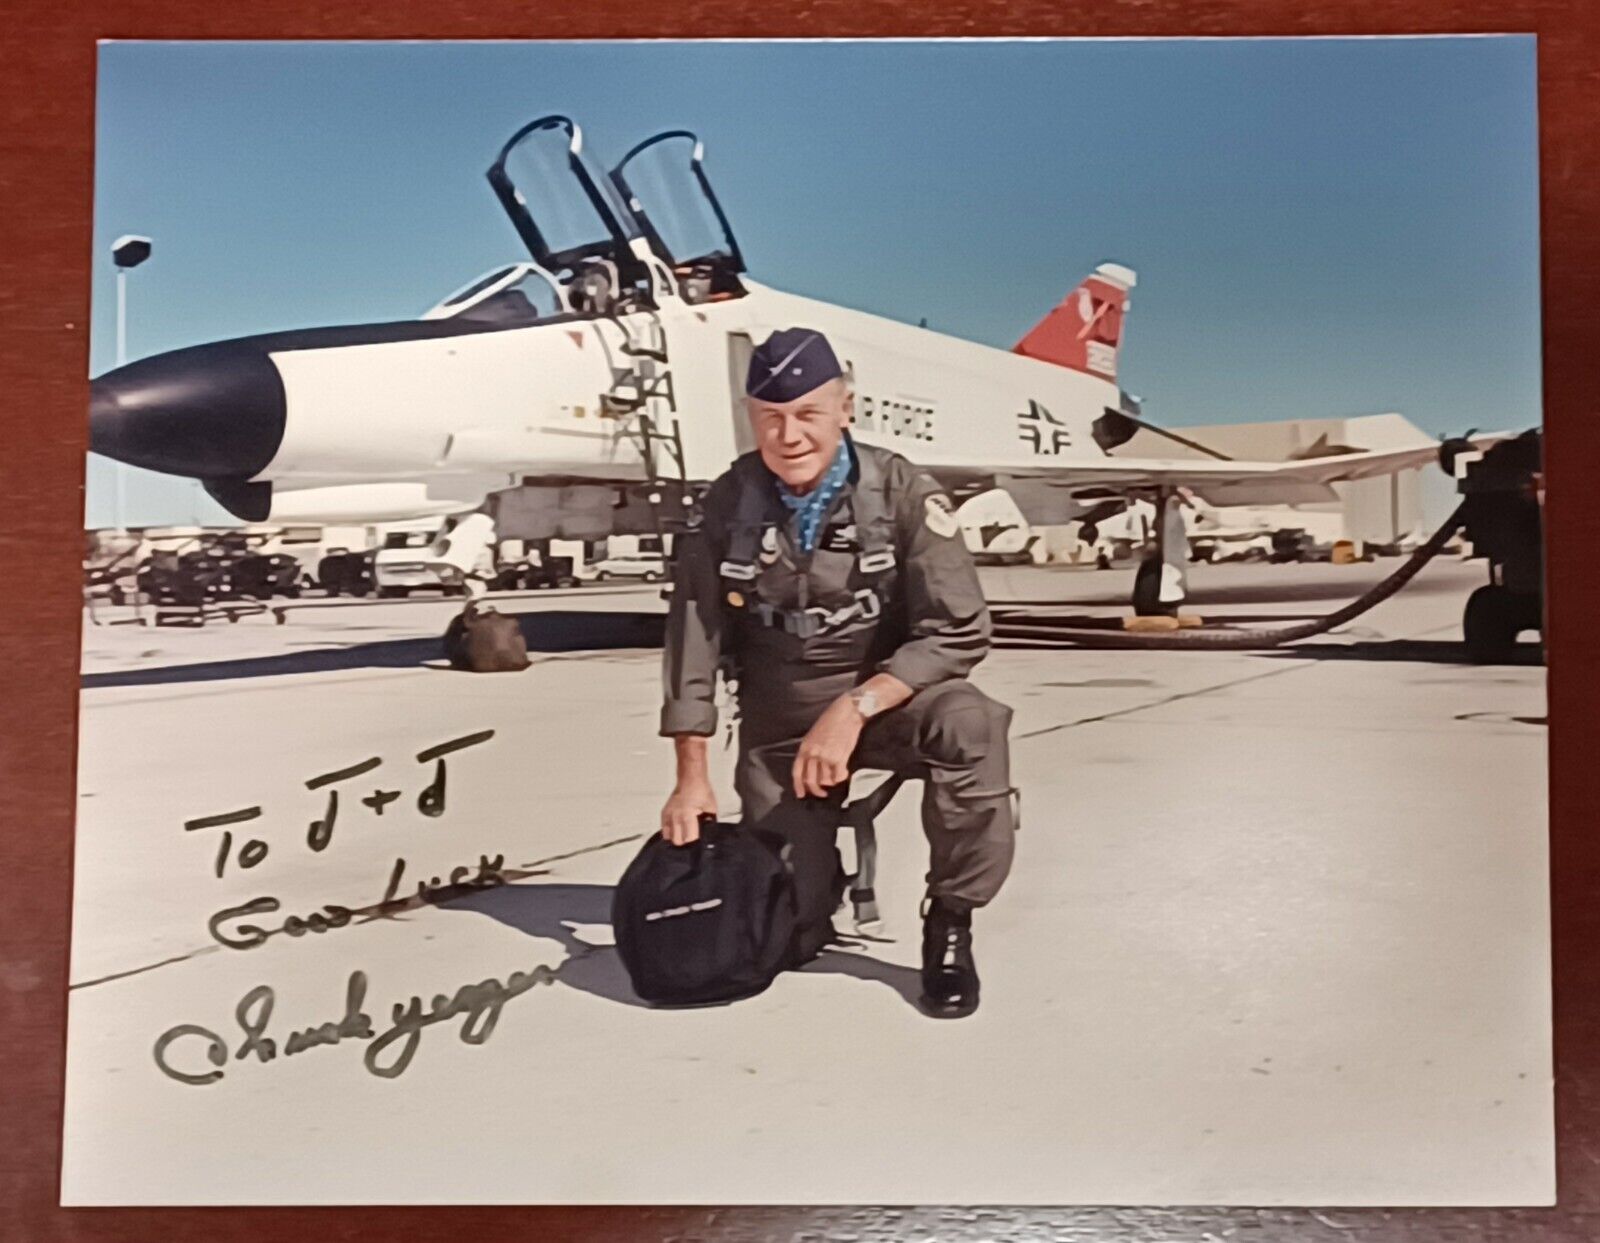 Chuck Yeager Autographed Color Photo 8x10 Guaranteed Authentic Undated Original